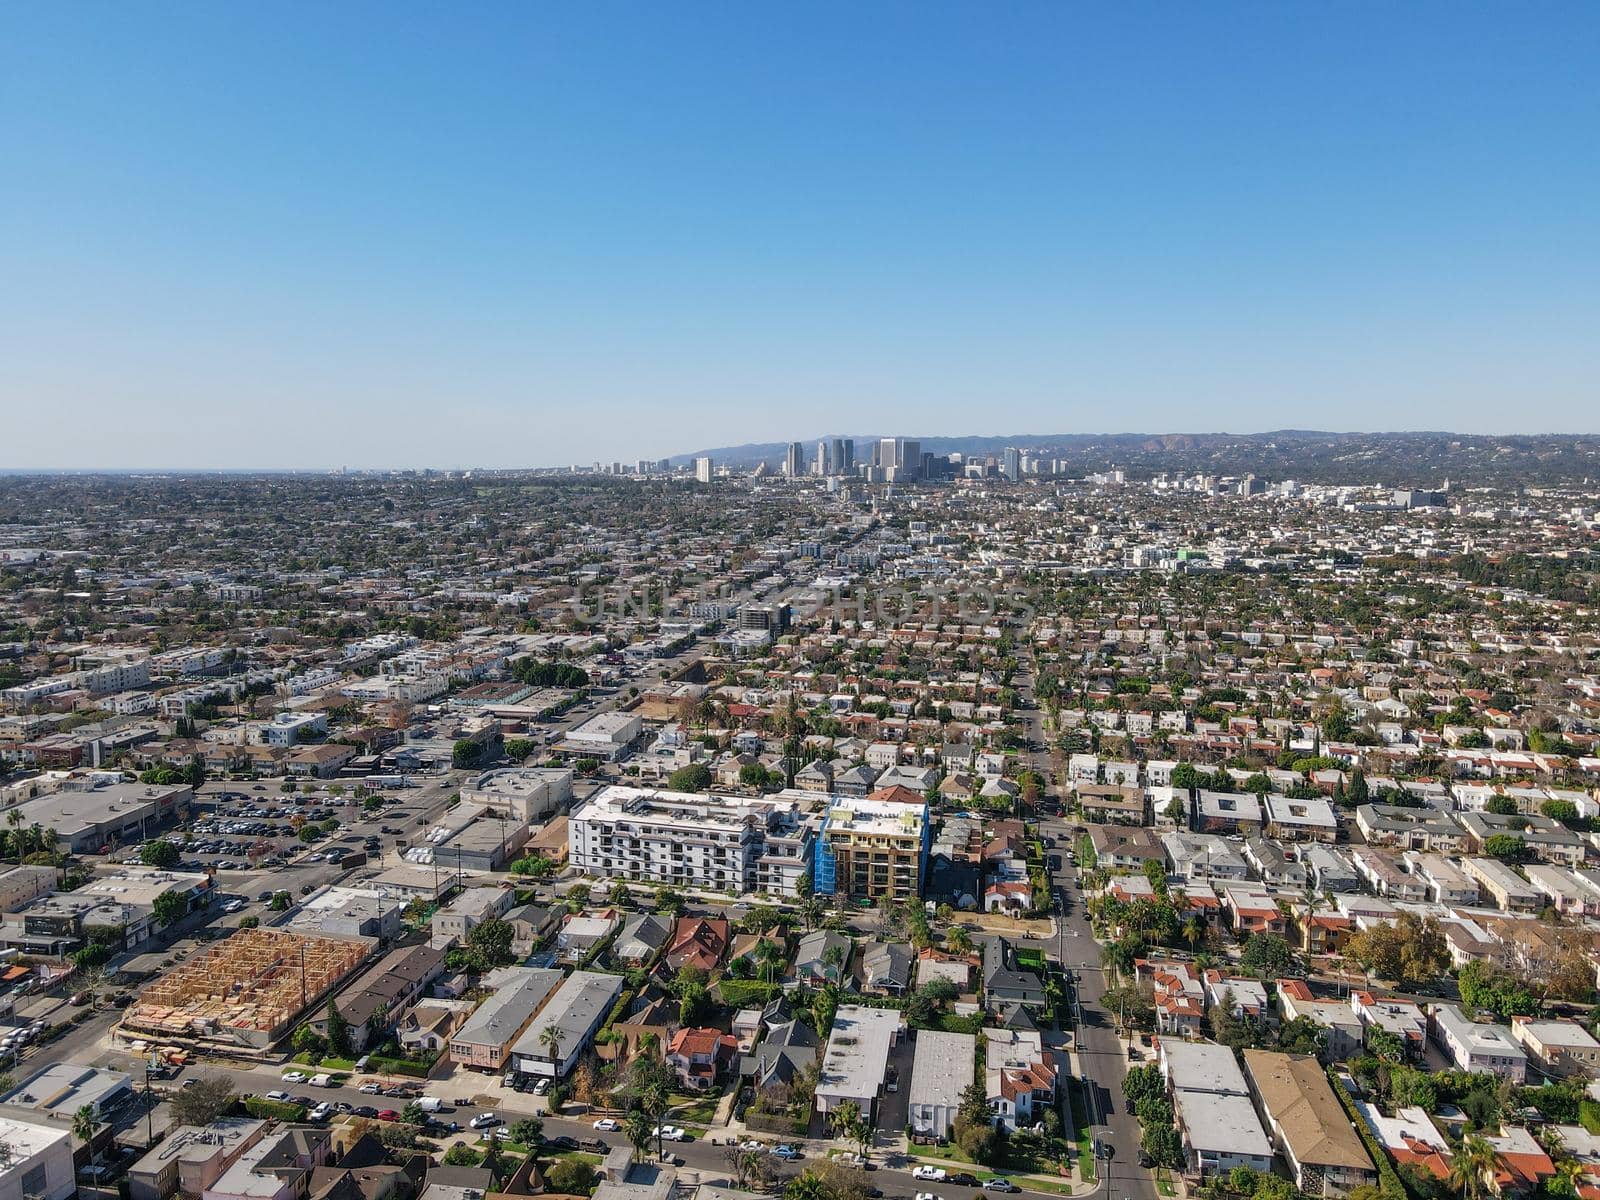 Aerial view above Mid-City neighborhood in Central Los Angeles by Bonandbon